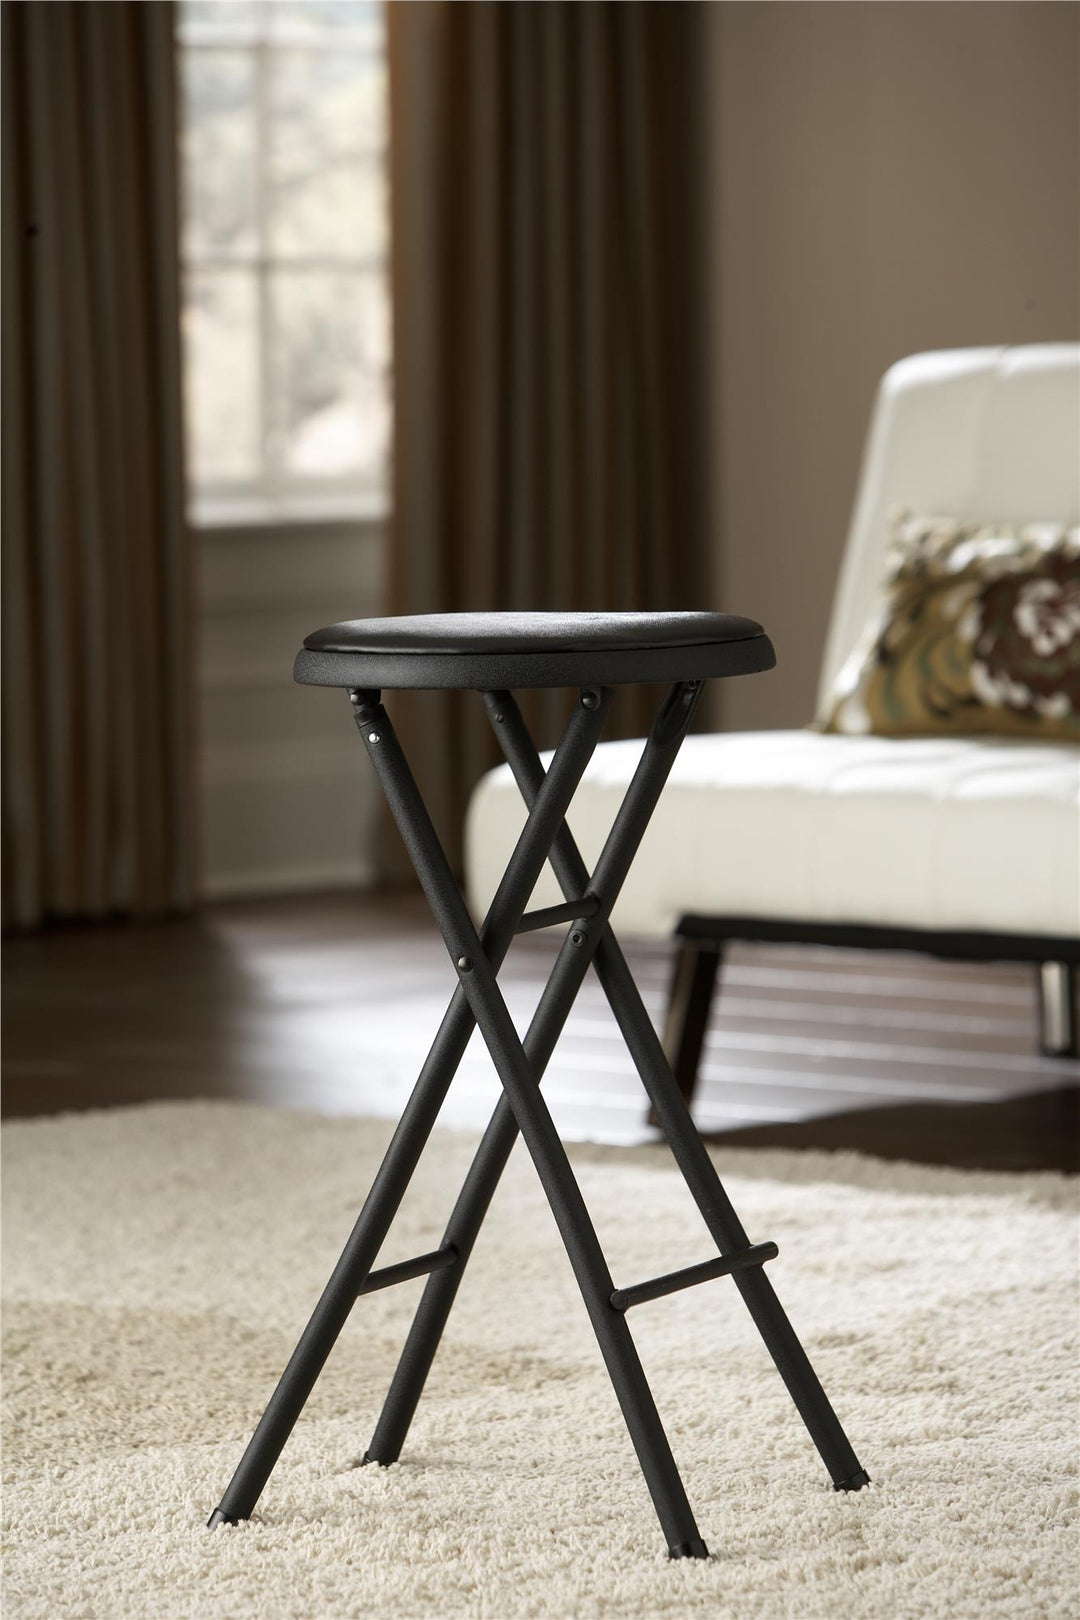 Lightweight folding stool for small spaces -  Black 